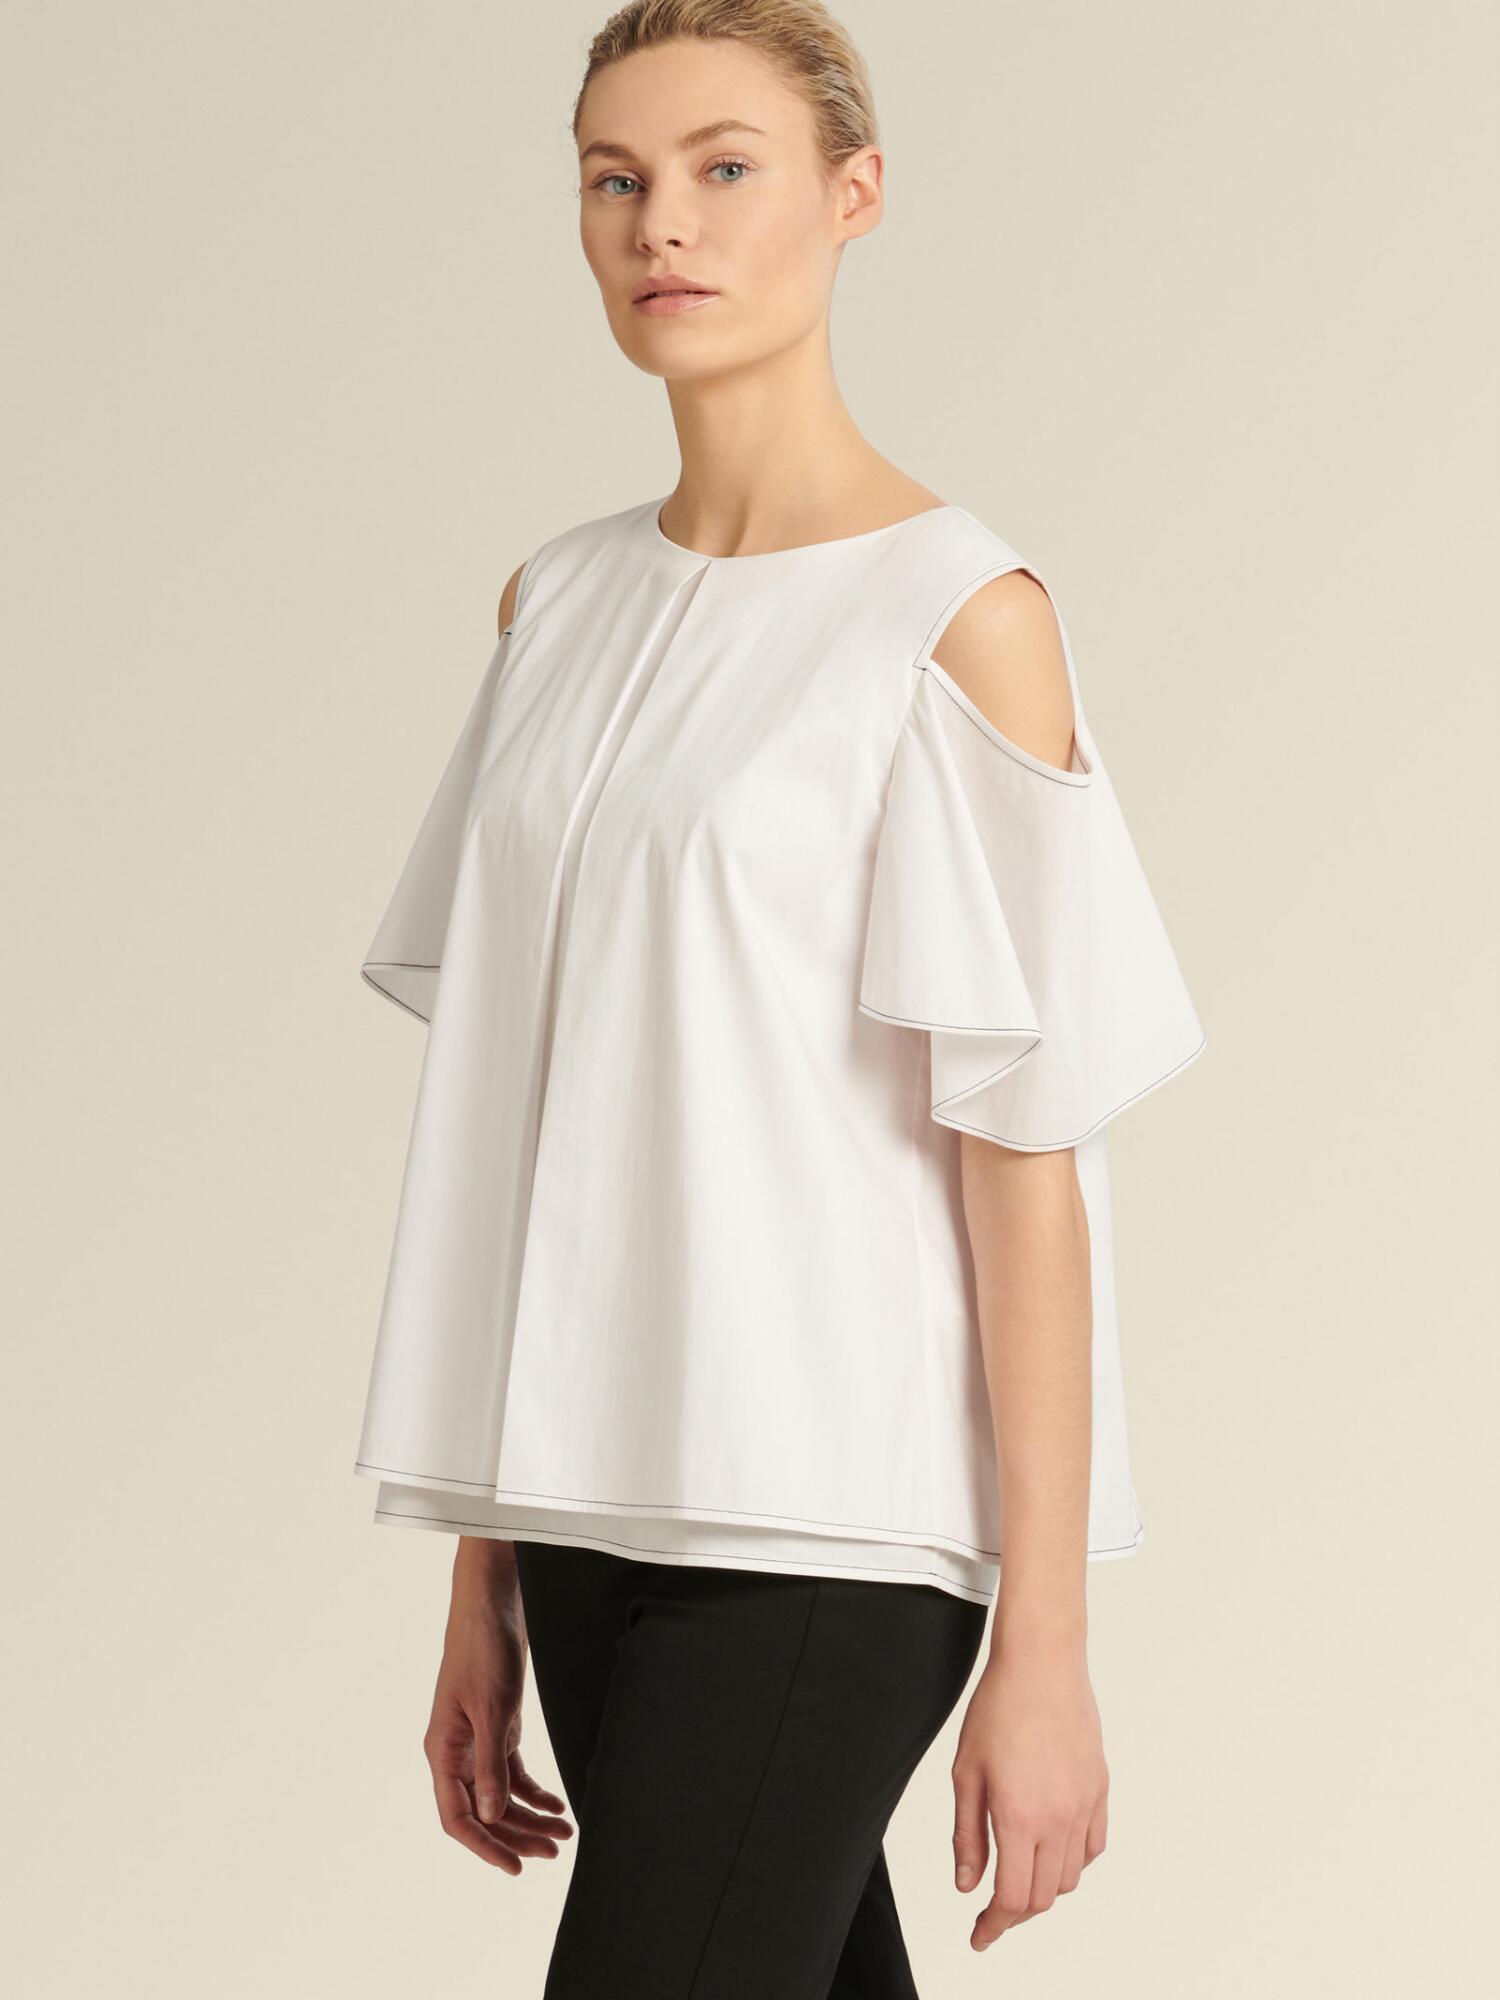 DKNY Cold Shoulder Top in White - Lyst